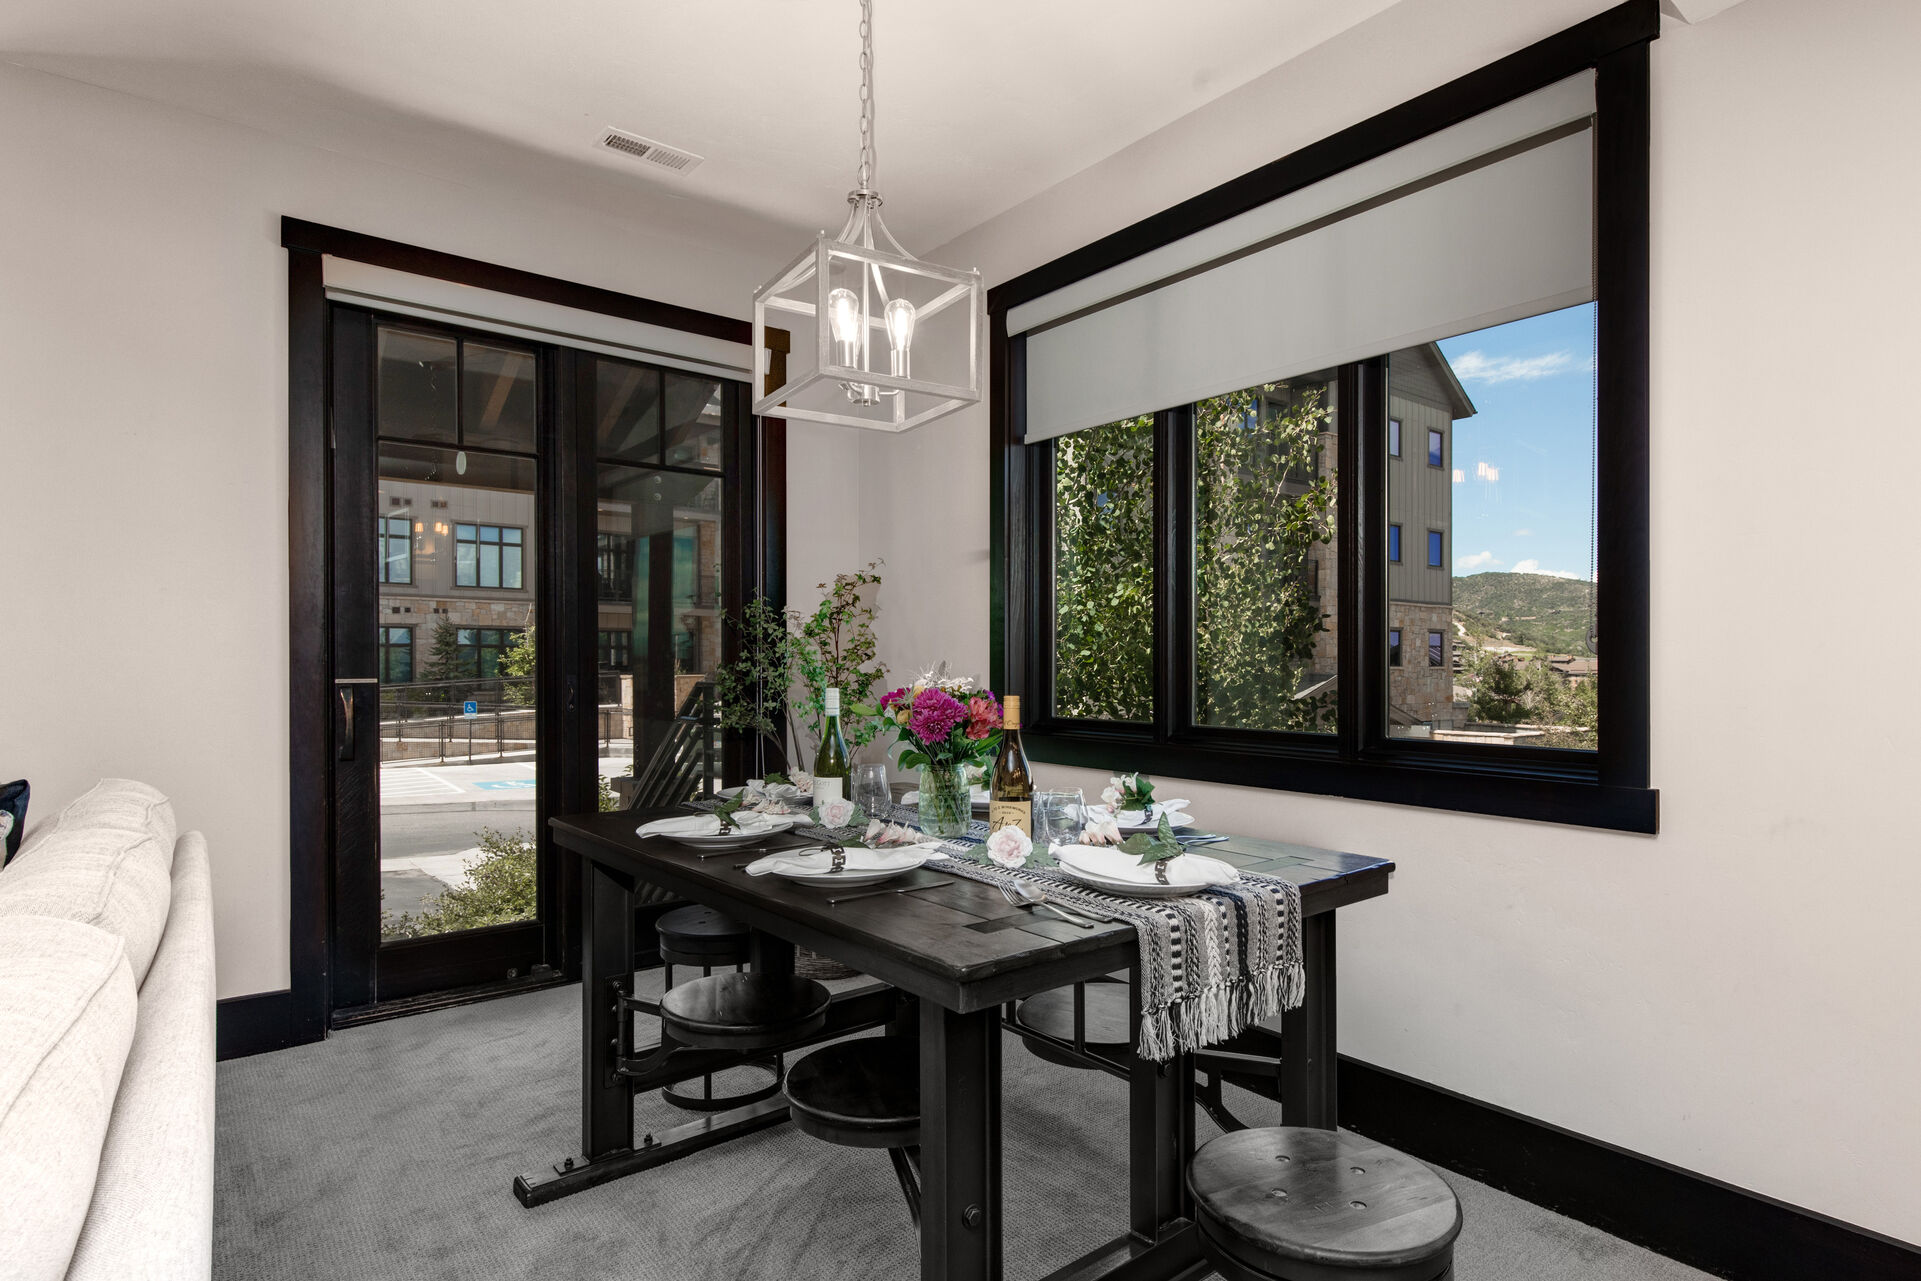 Dining Area with built-in seating for 6 and private patio access